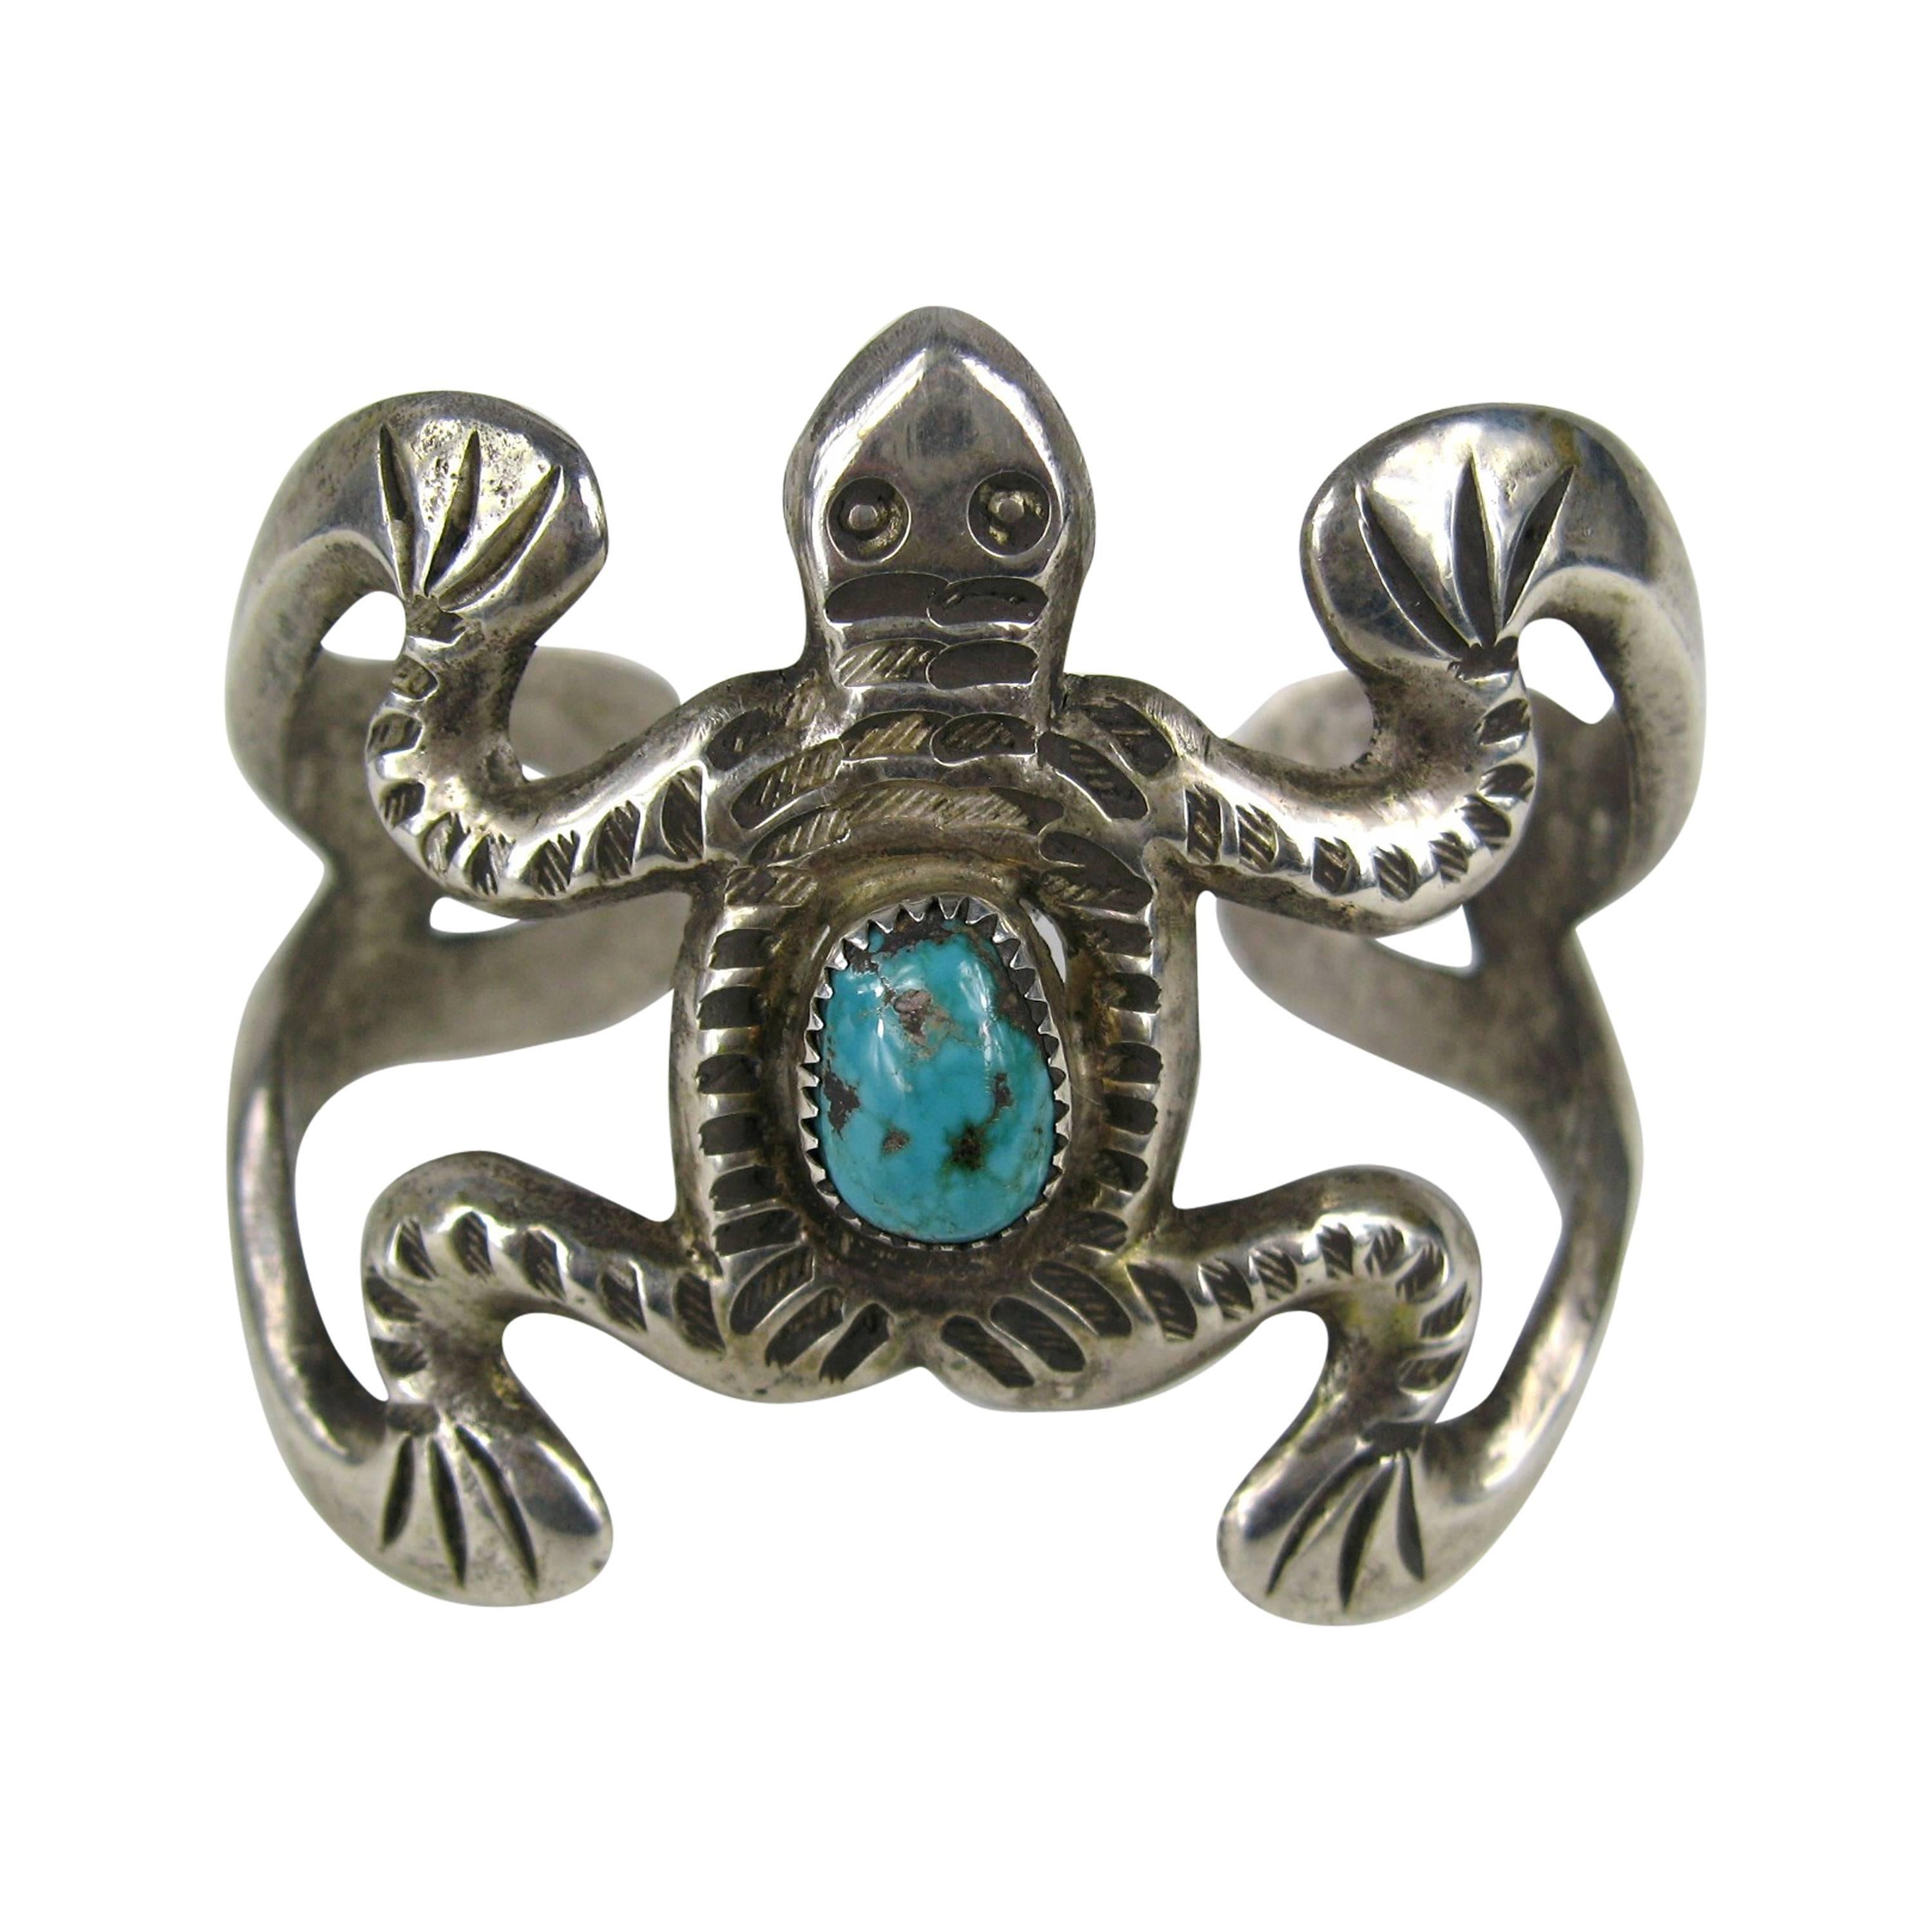  Sterling Silver Bracelet Sandcast Frog Cuff Native American Navajo   In Good Condition For Sale In Wallkill, NY